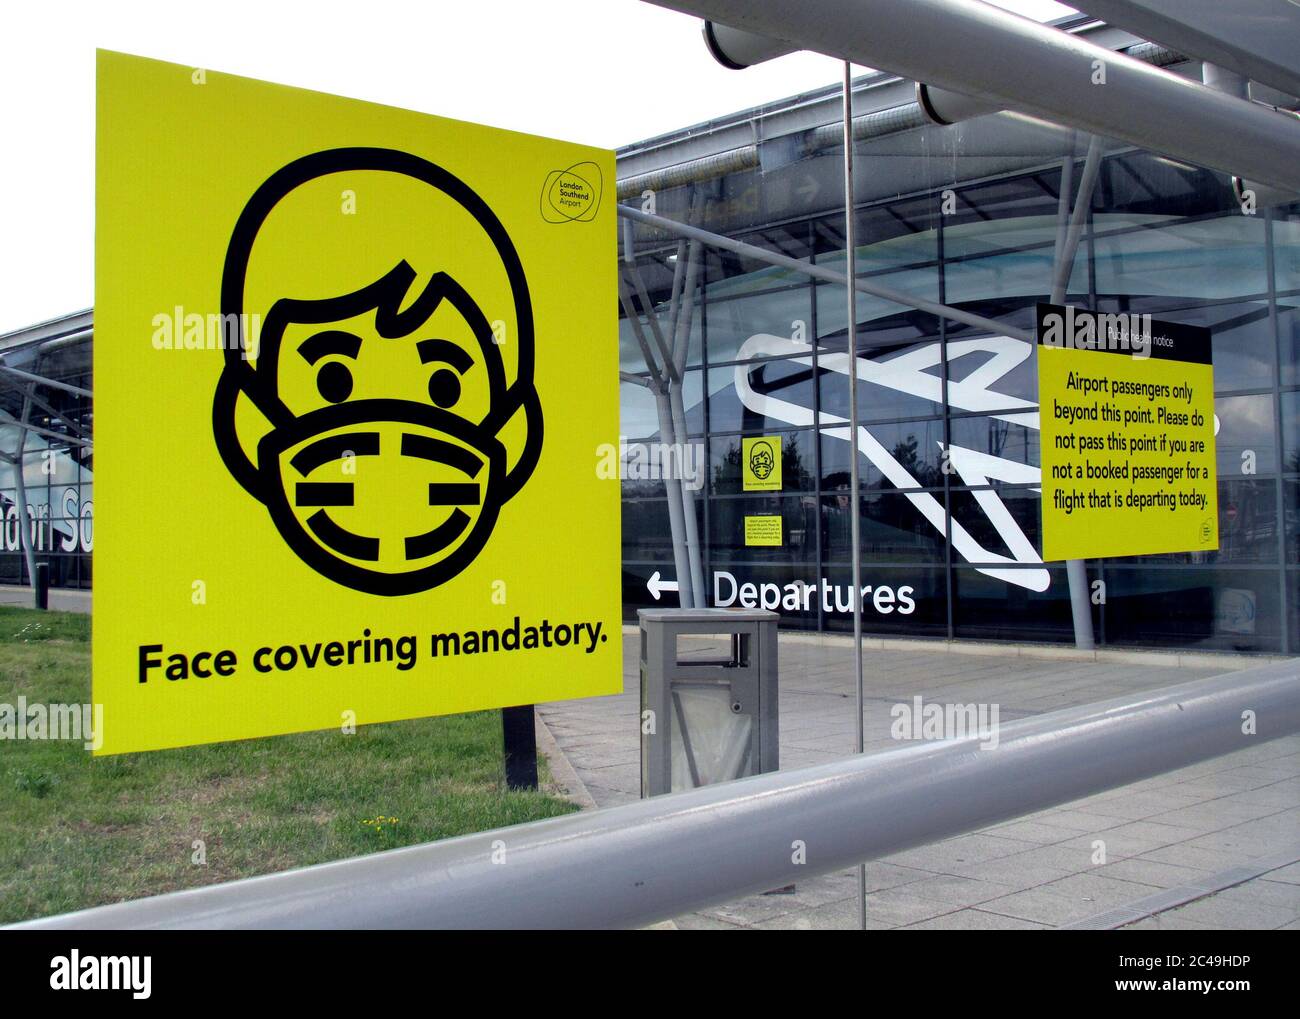 London Southend airport have made their terminal covid-19 secure by mandatory face coverings and only passengers with flights allowed inside June 2020 Stock Photo